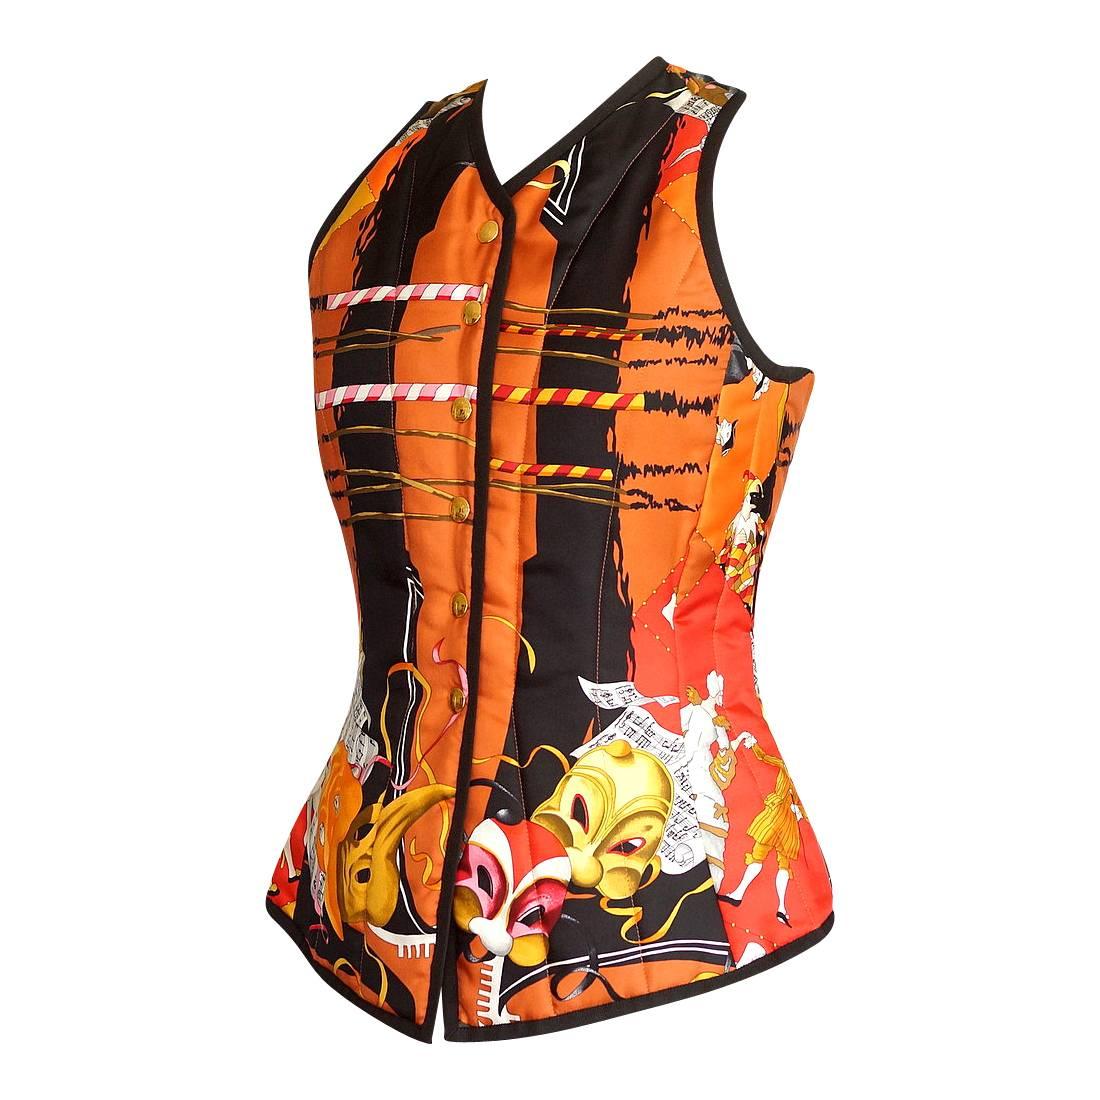 Mightychic offers a vintage Hermes Carnavale De Venise scarf print beautifully shaped vest.
The exquisite shapes and stunning colors of the Venetian Carnaval.
V-neck with 6 gold embossed snaps and brown piping all around.
Gentle wadding.
Beautiful